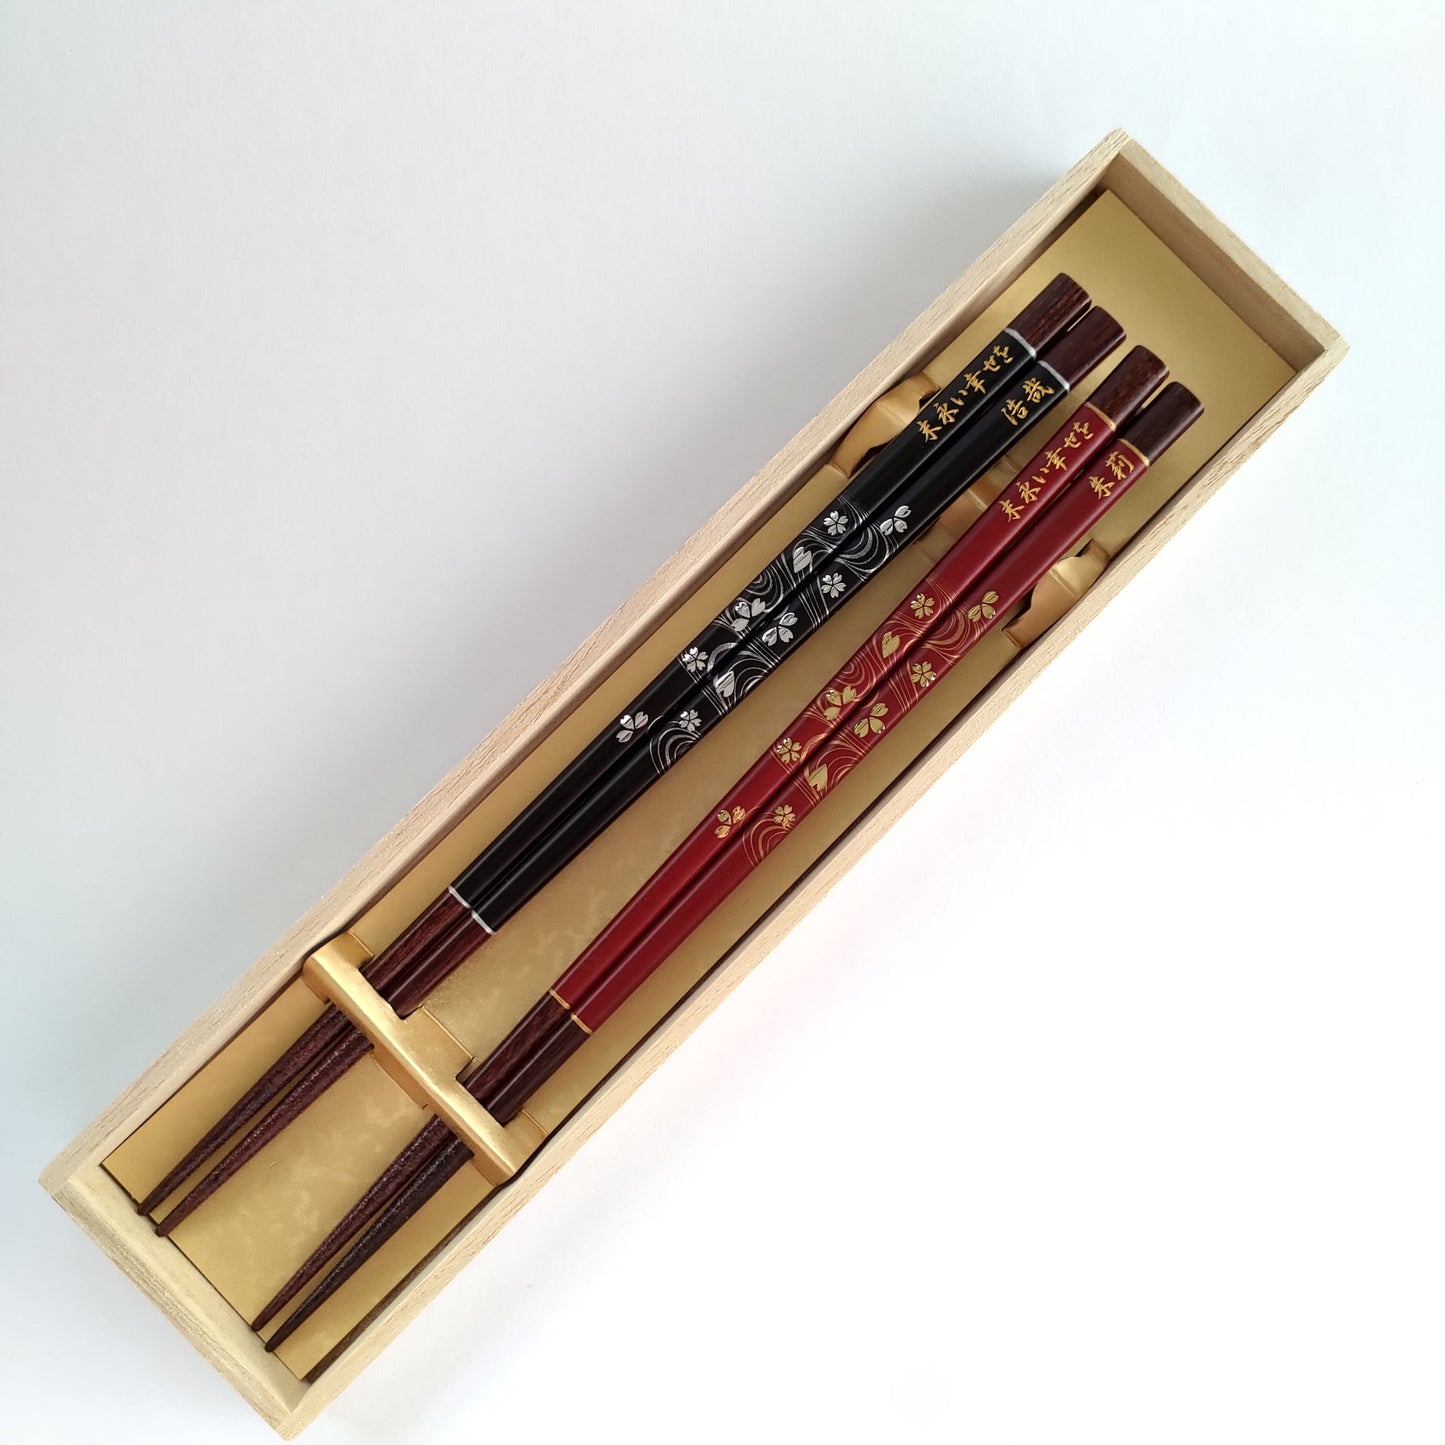 Elegant Japanese chopsticks with cherry blossoms on river stream black red - DOUBLE PAIR WITH ENGRAVED WOODEN BOX SET